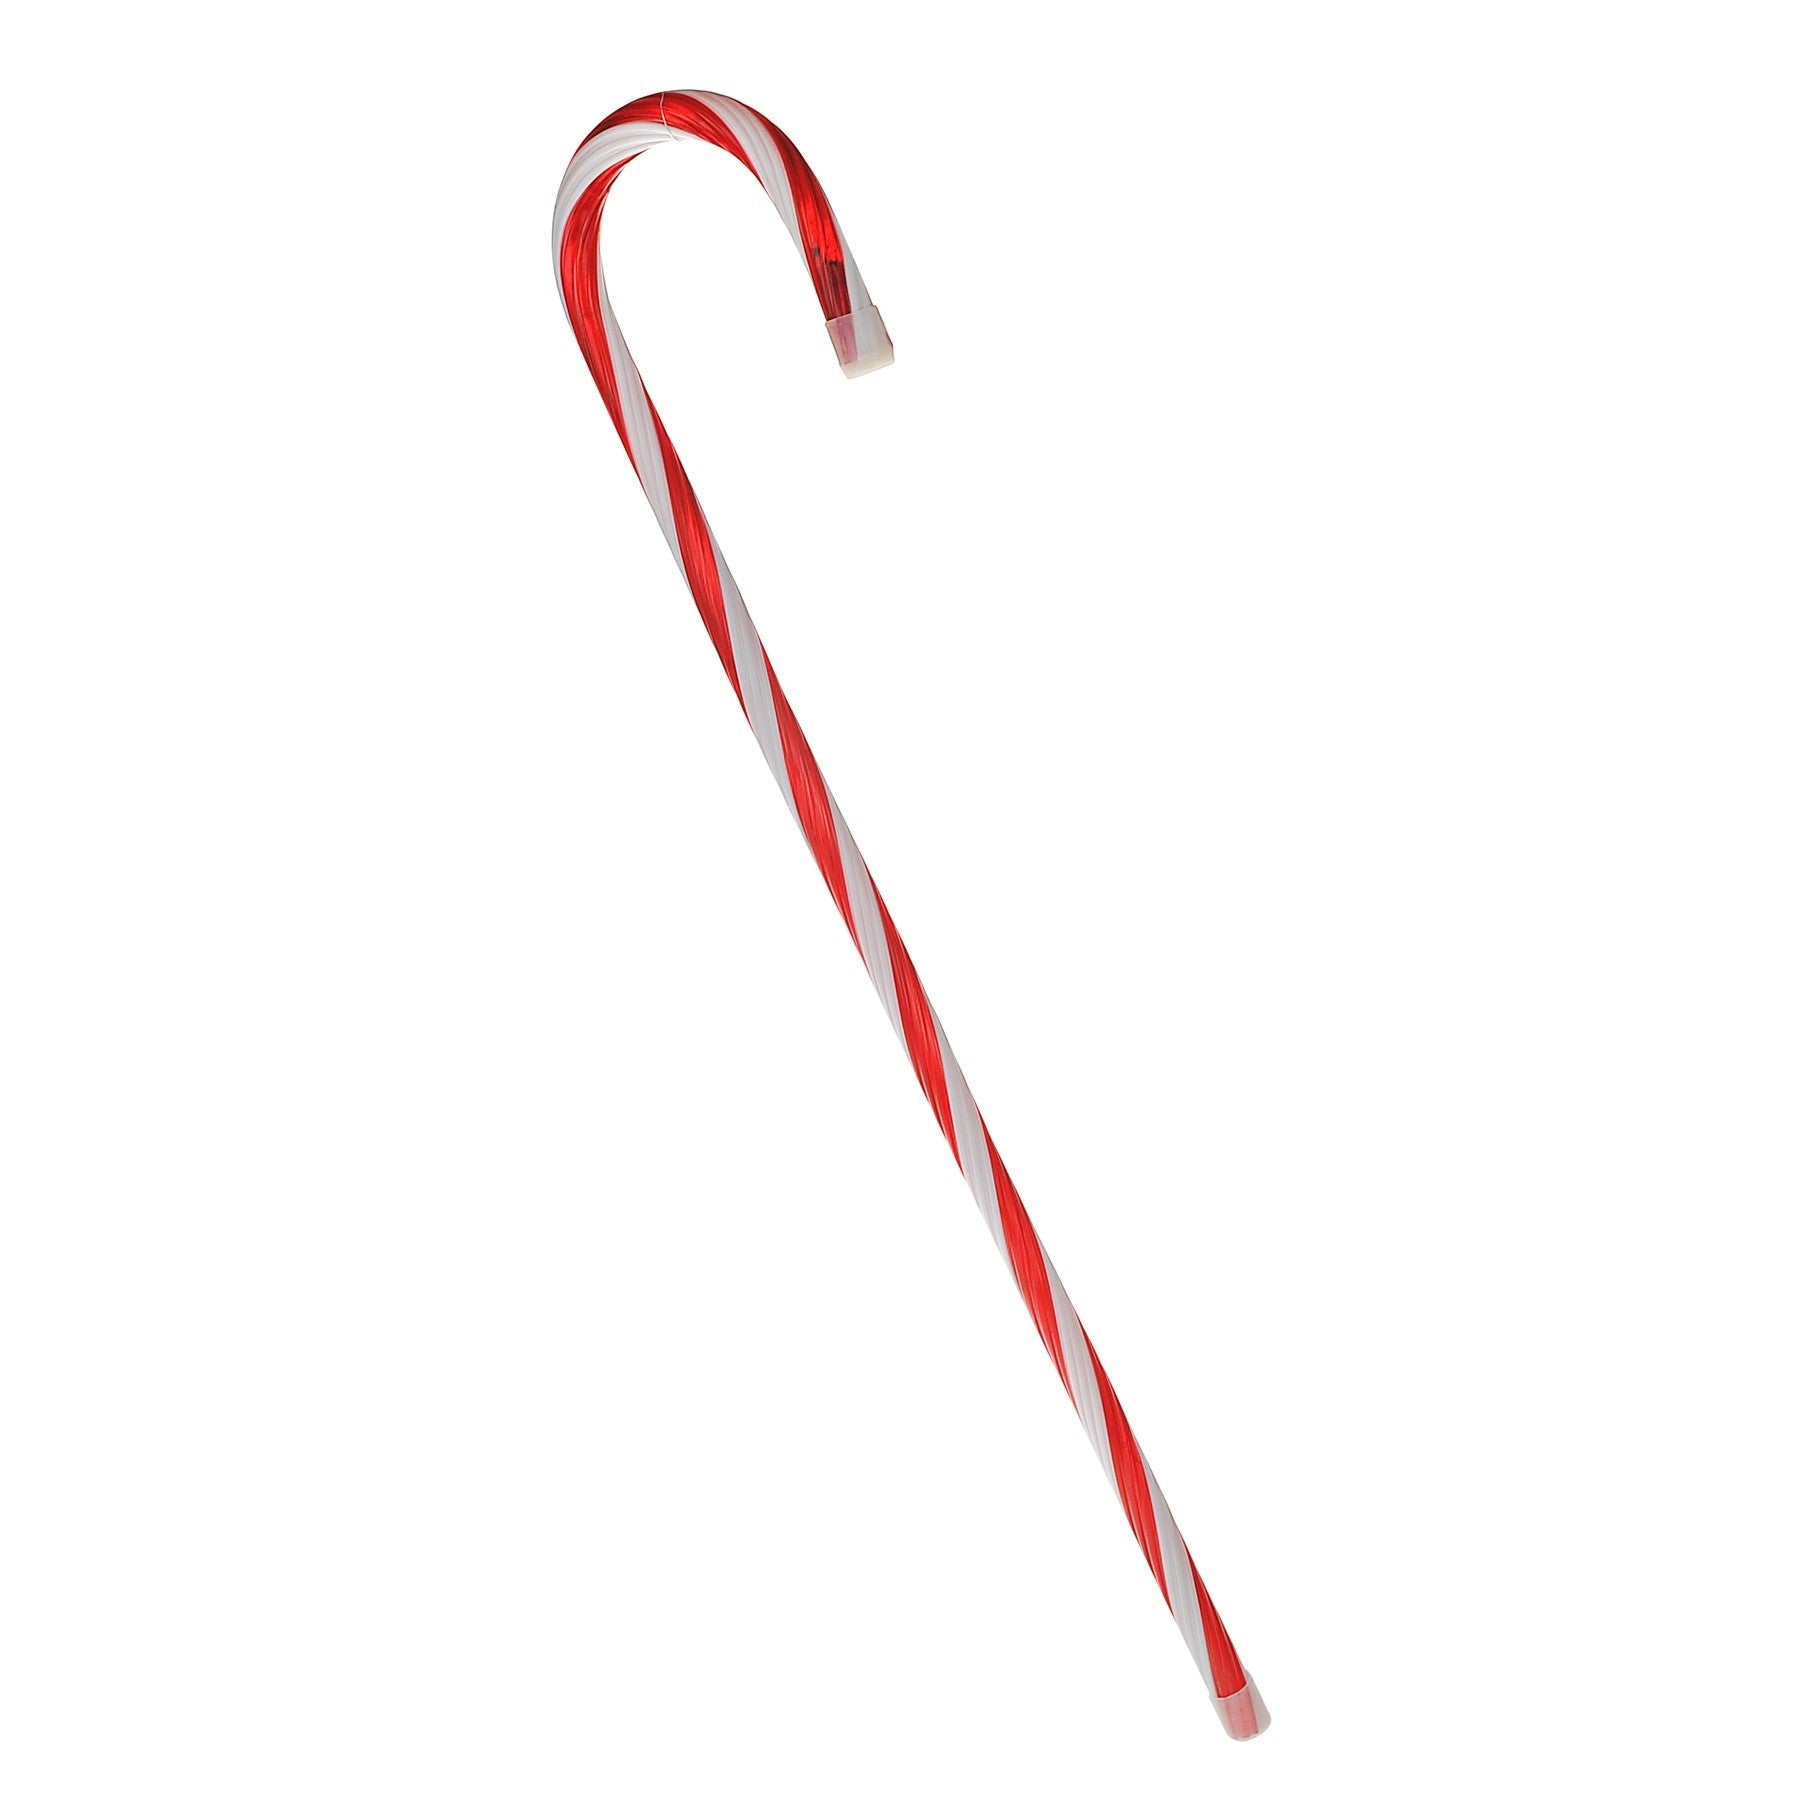 View LED Candy Cane 76cm information